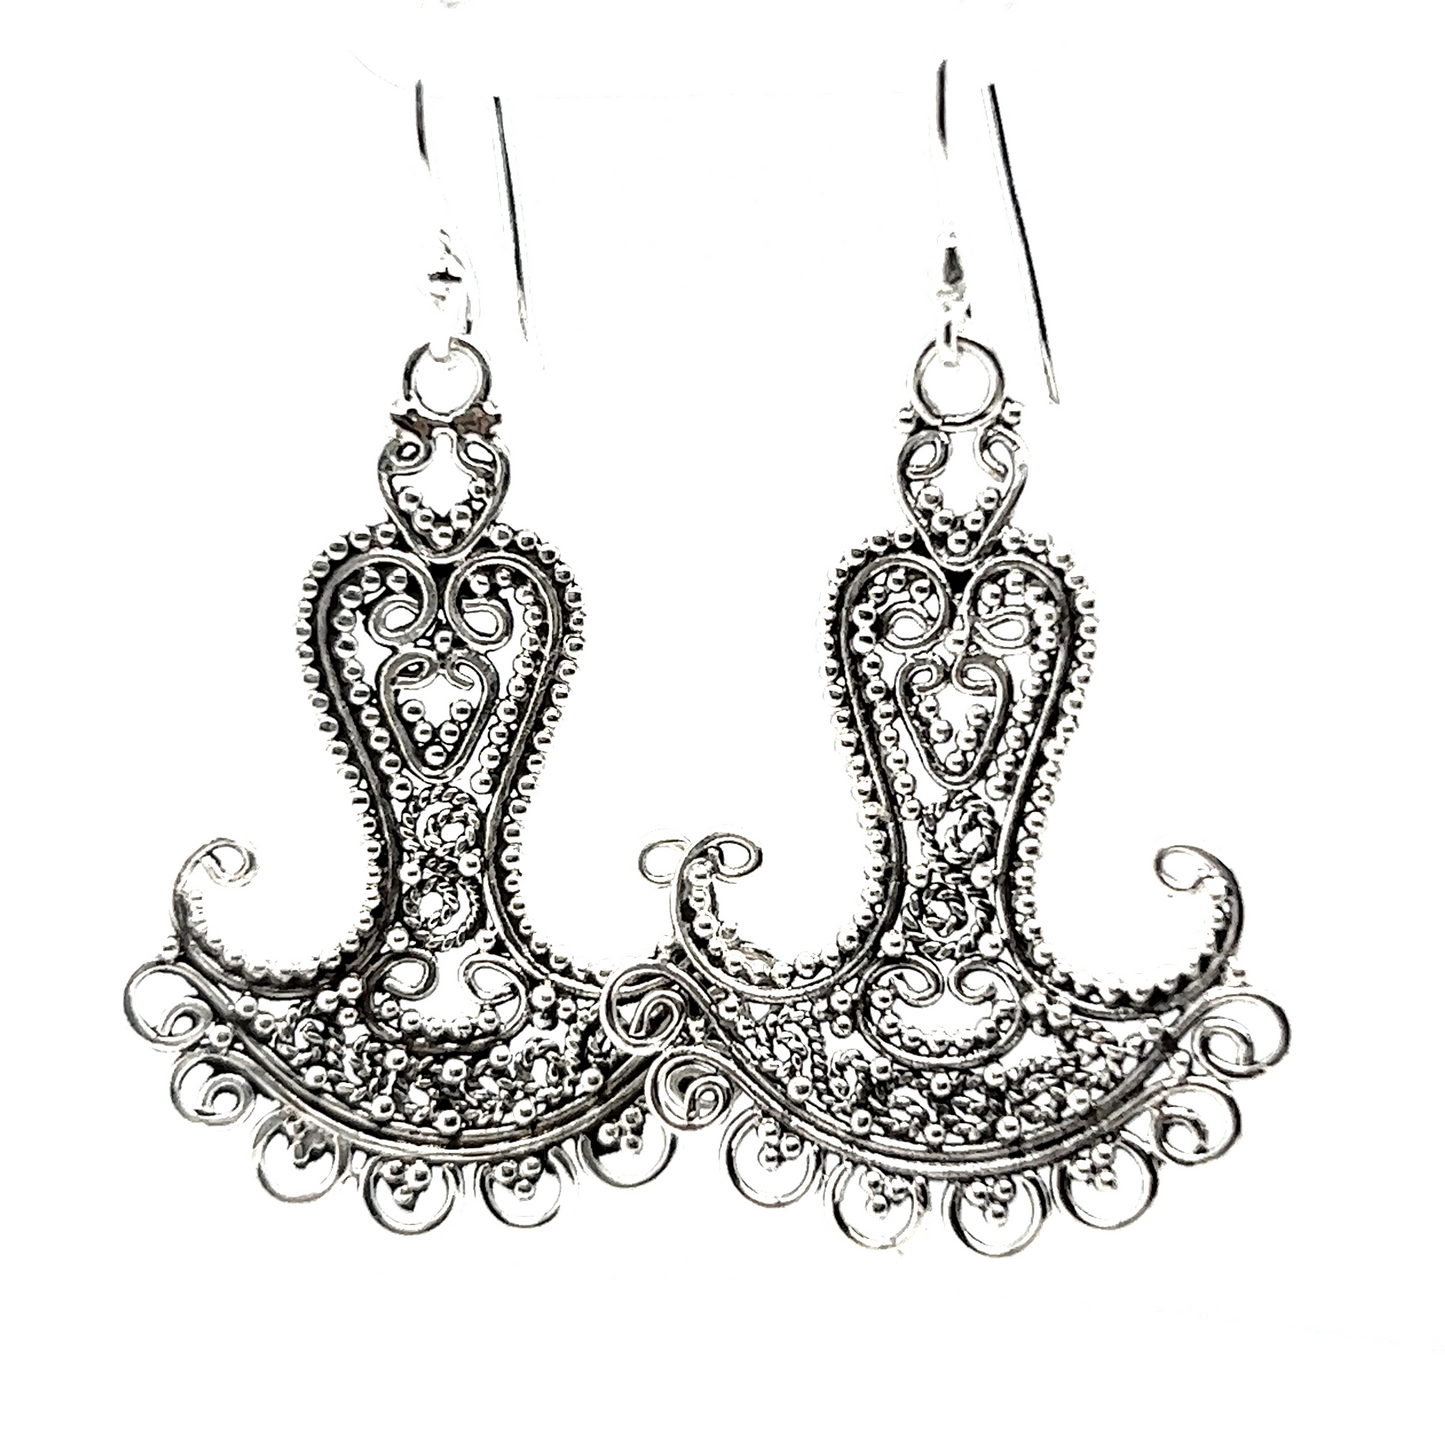 A pair of exquisite Handmade Bali Freeform Statement Earrings with ornate Super Silver designs.